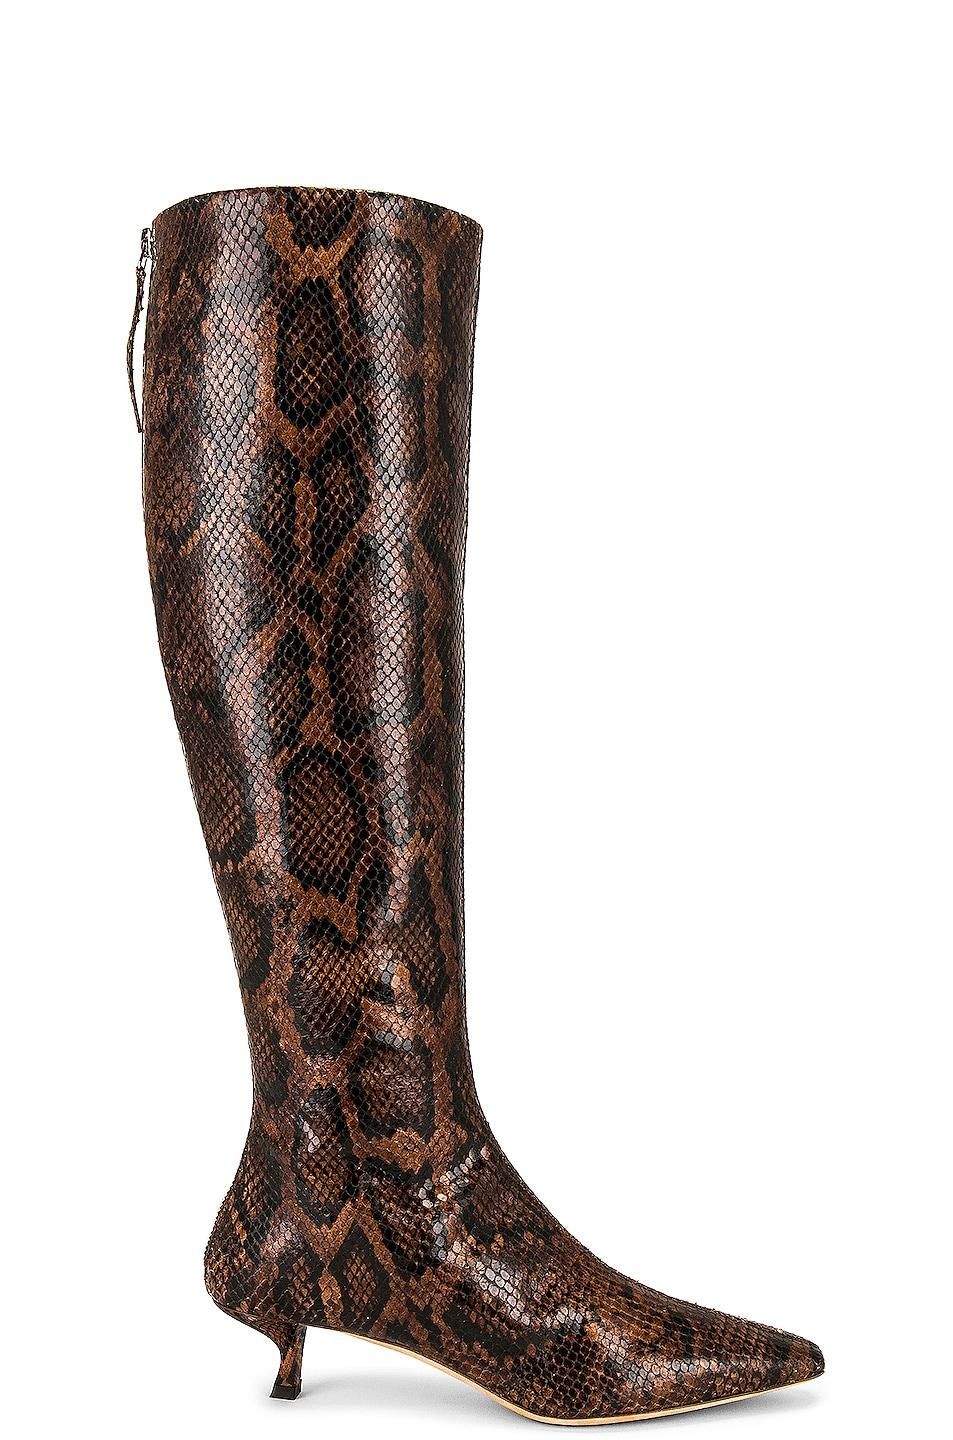 Image 1 of Arielle Baron Odessa Boot in Mahogany Printed Python